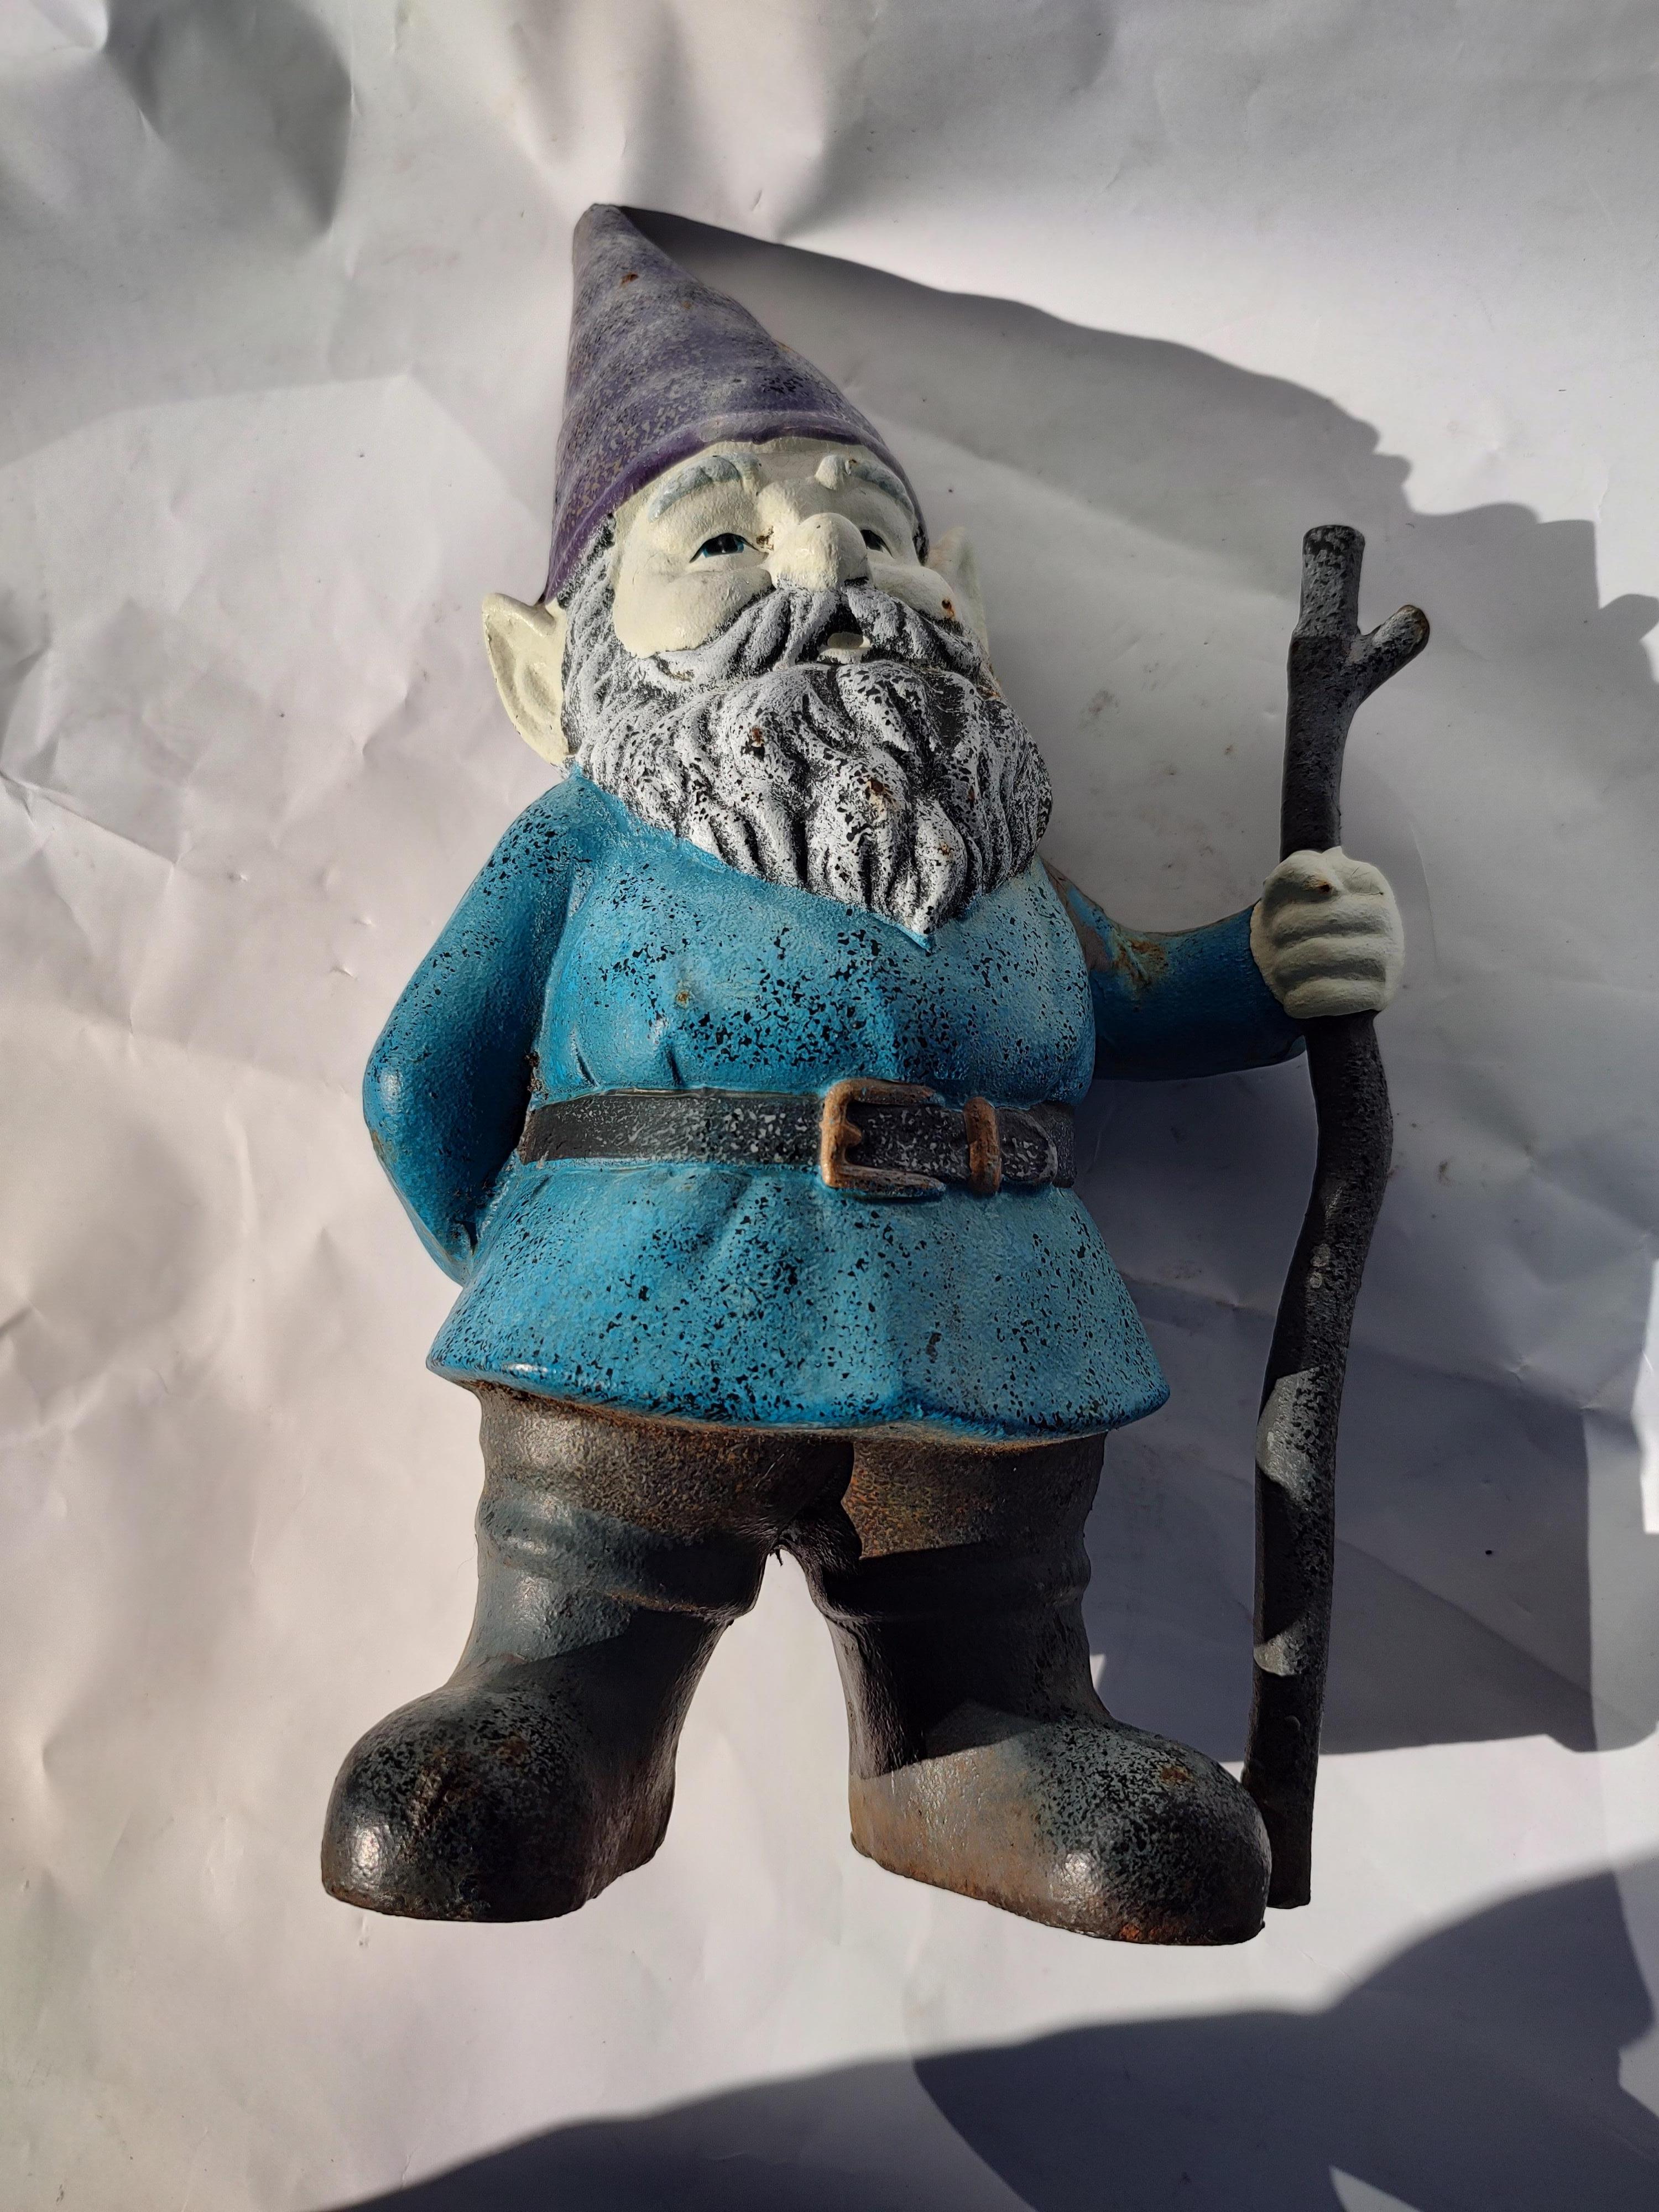 Very detailed cast iron Gnome with Walking Stick. Great color retention with no damage, just normal fade of the paint. Love that purple hat!